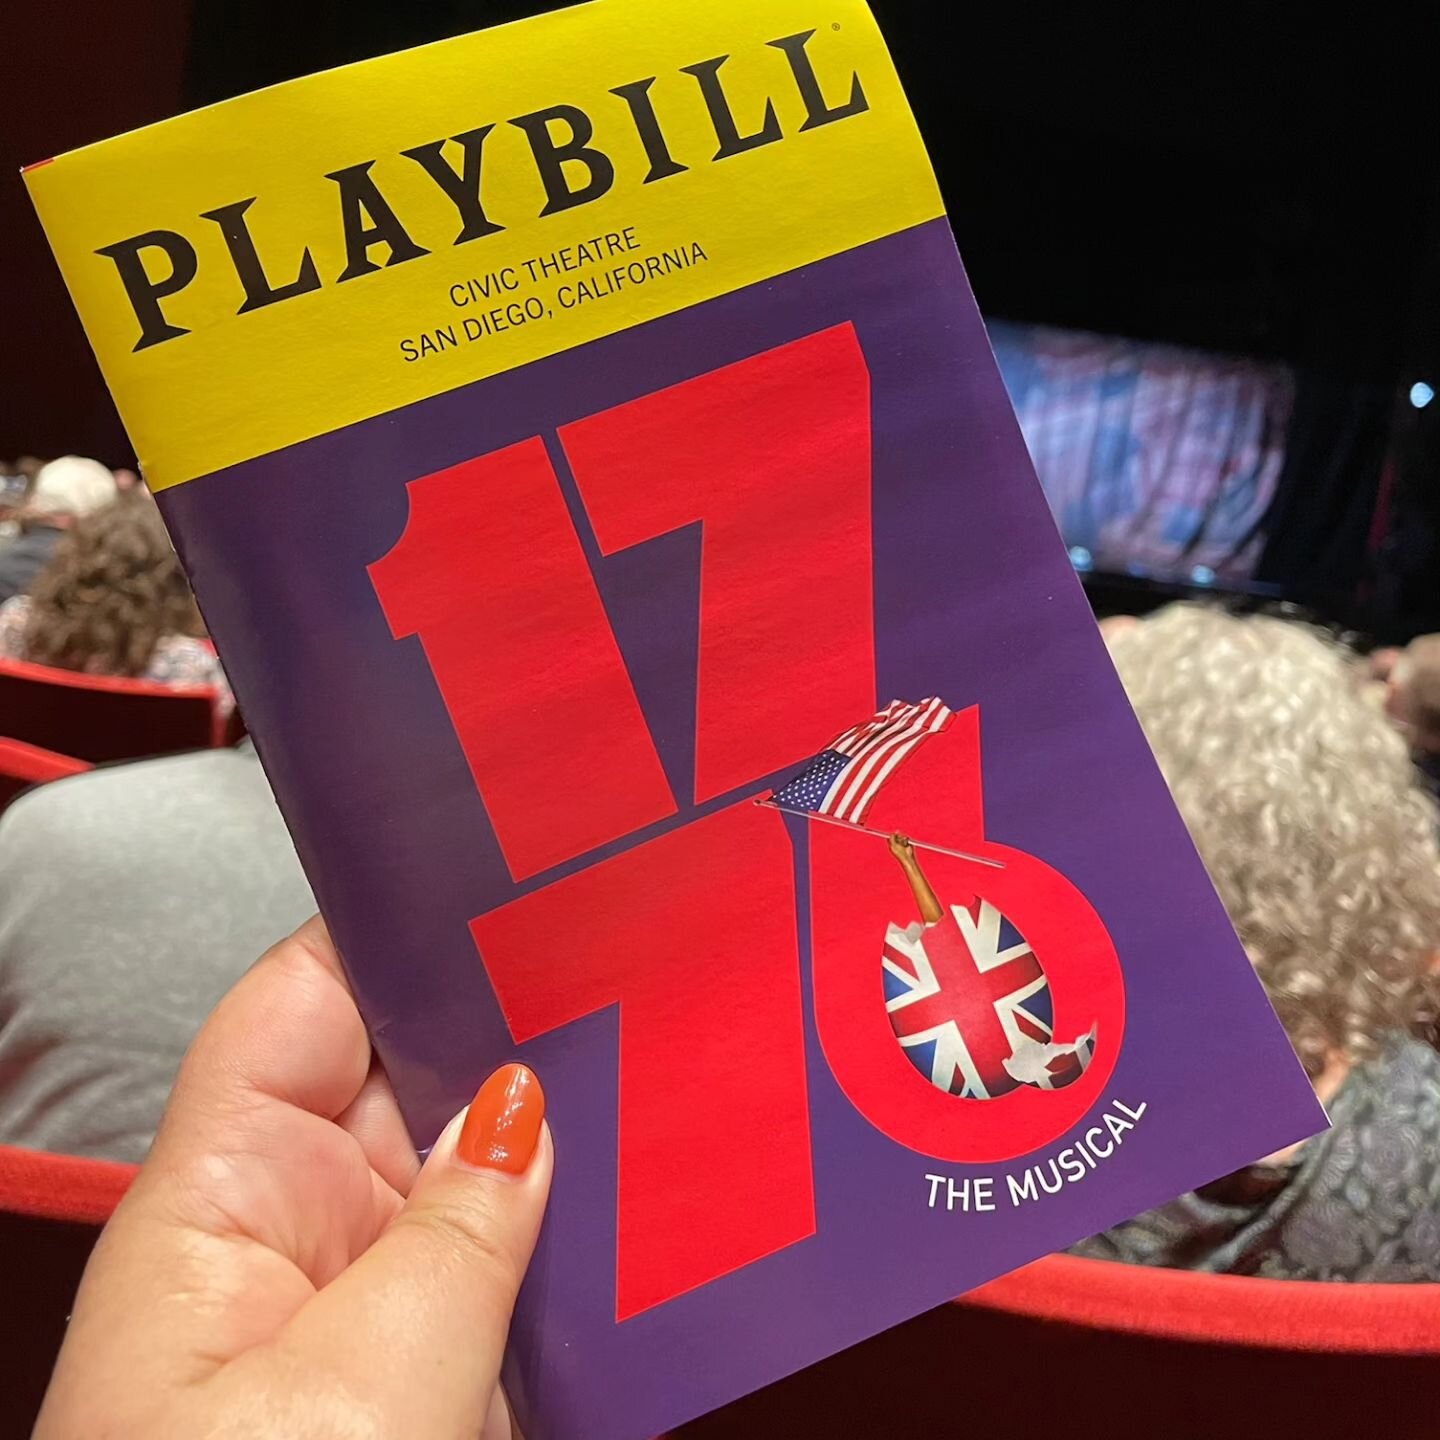 &quot;This is a revolution, dammit! We're going to have to offend SOMEbody!&quot;
.
.
.
.
#1776musical #broadwaysd #musical #Broadway #theatre